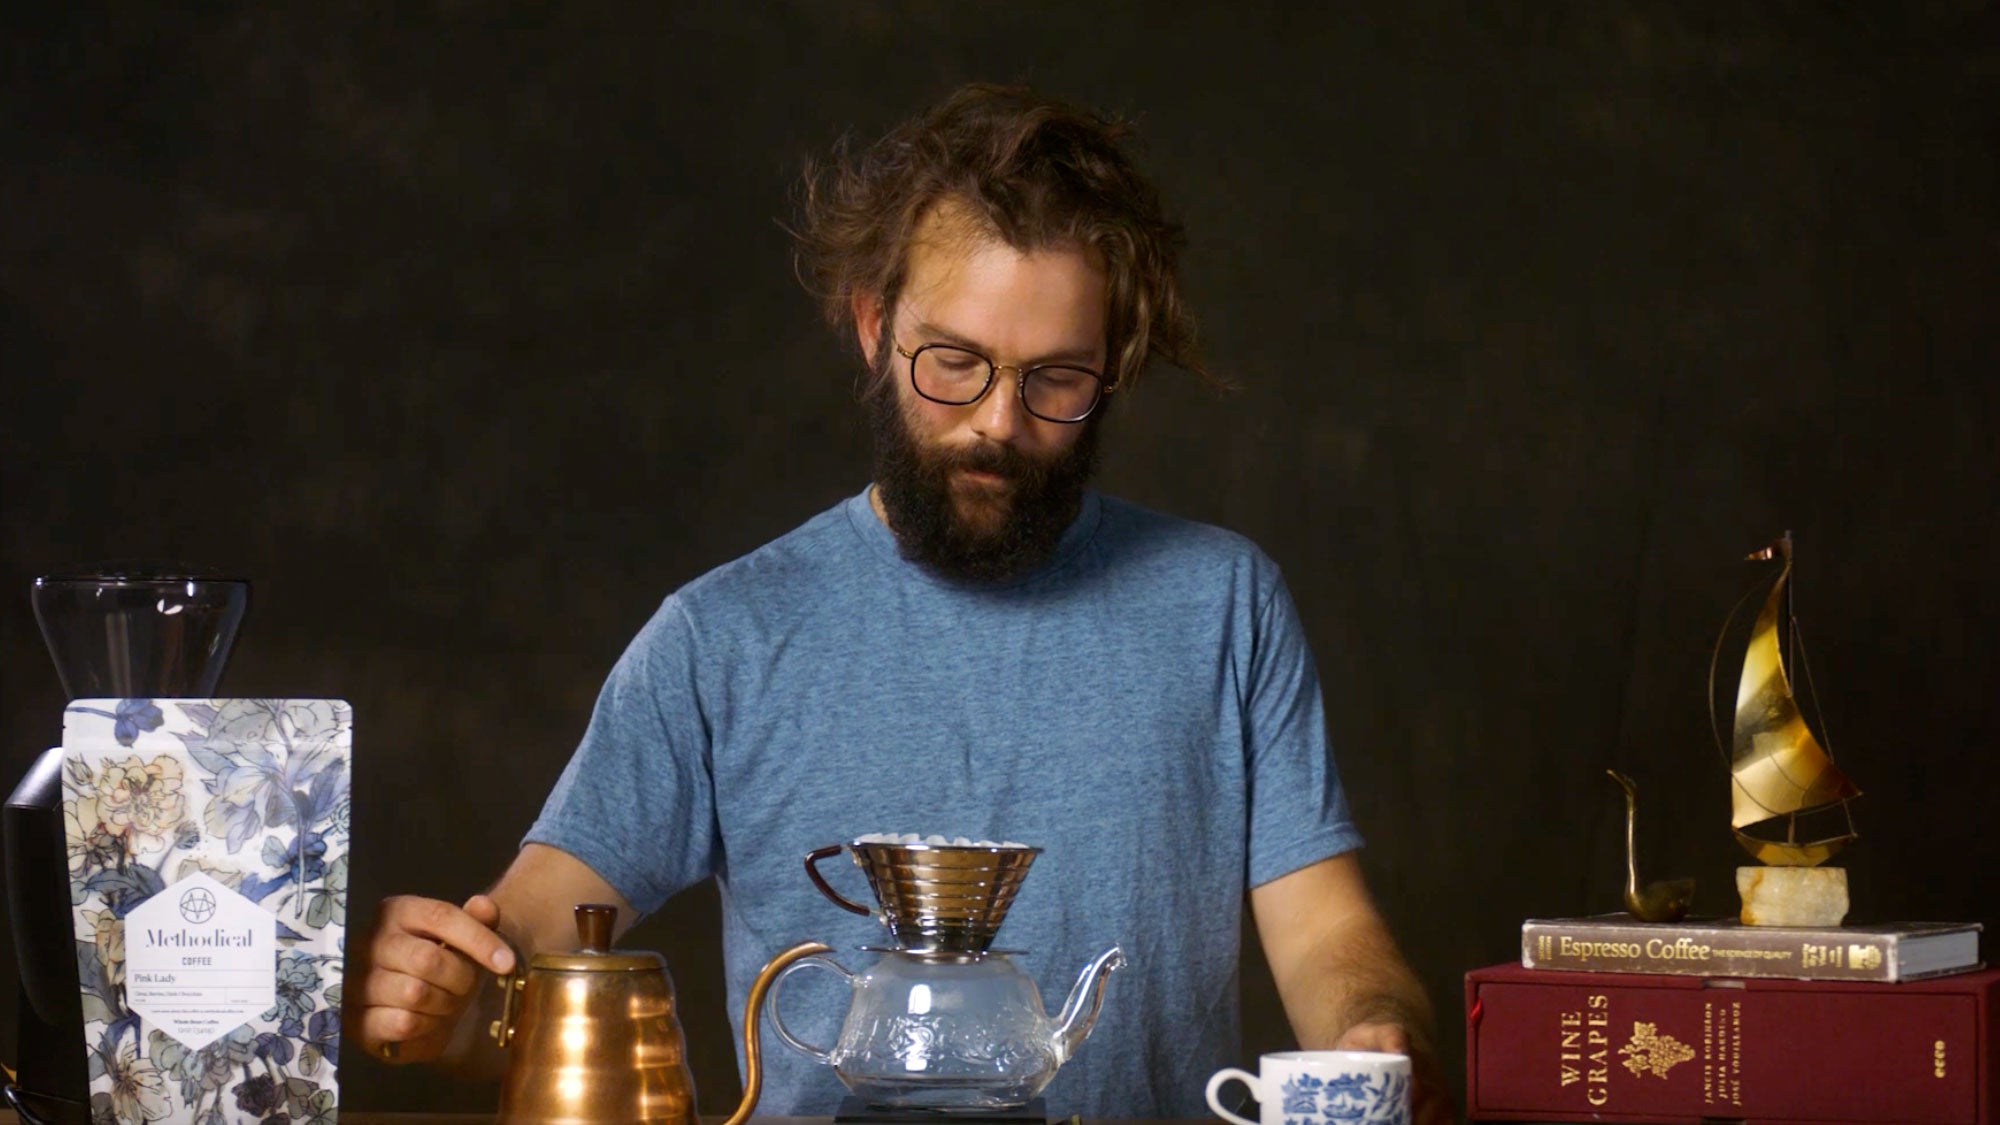 How to Make a Pour Over Coffee